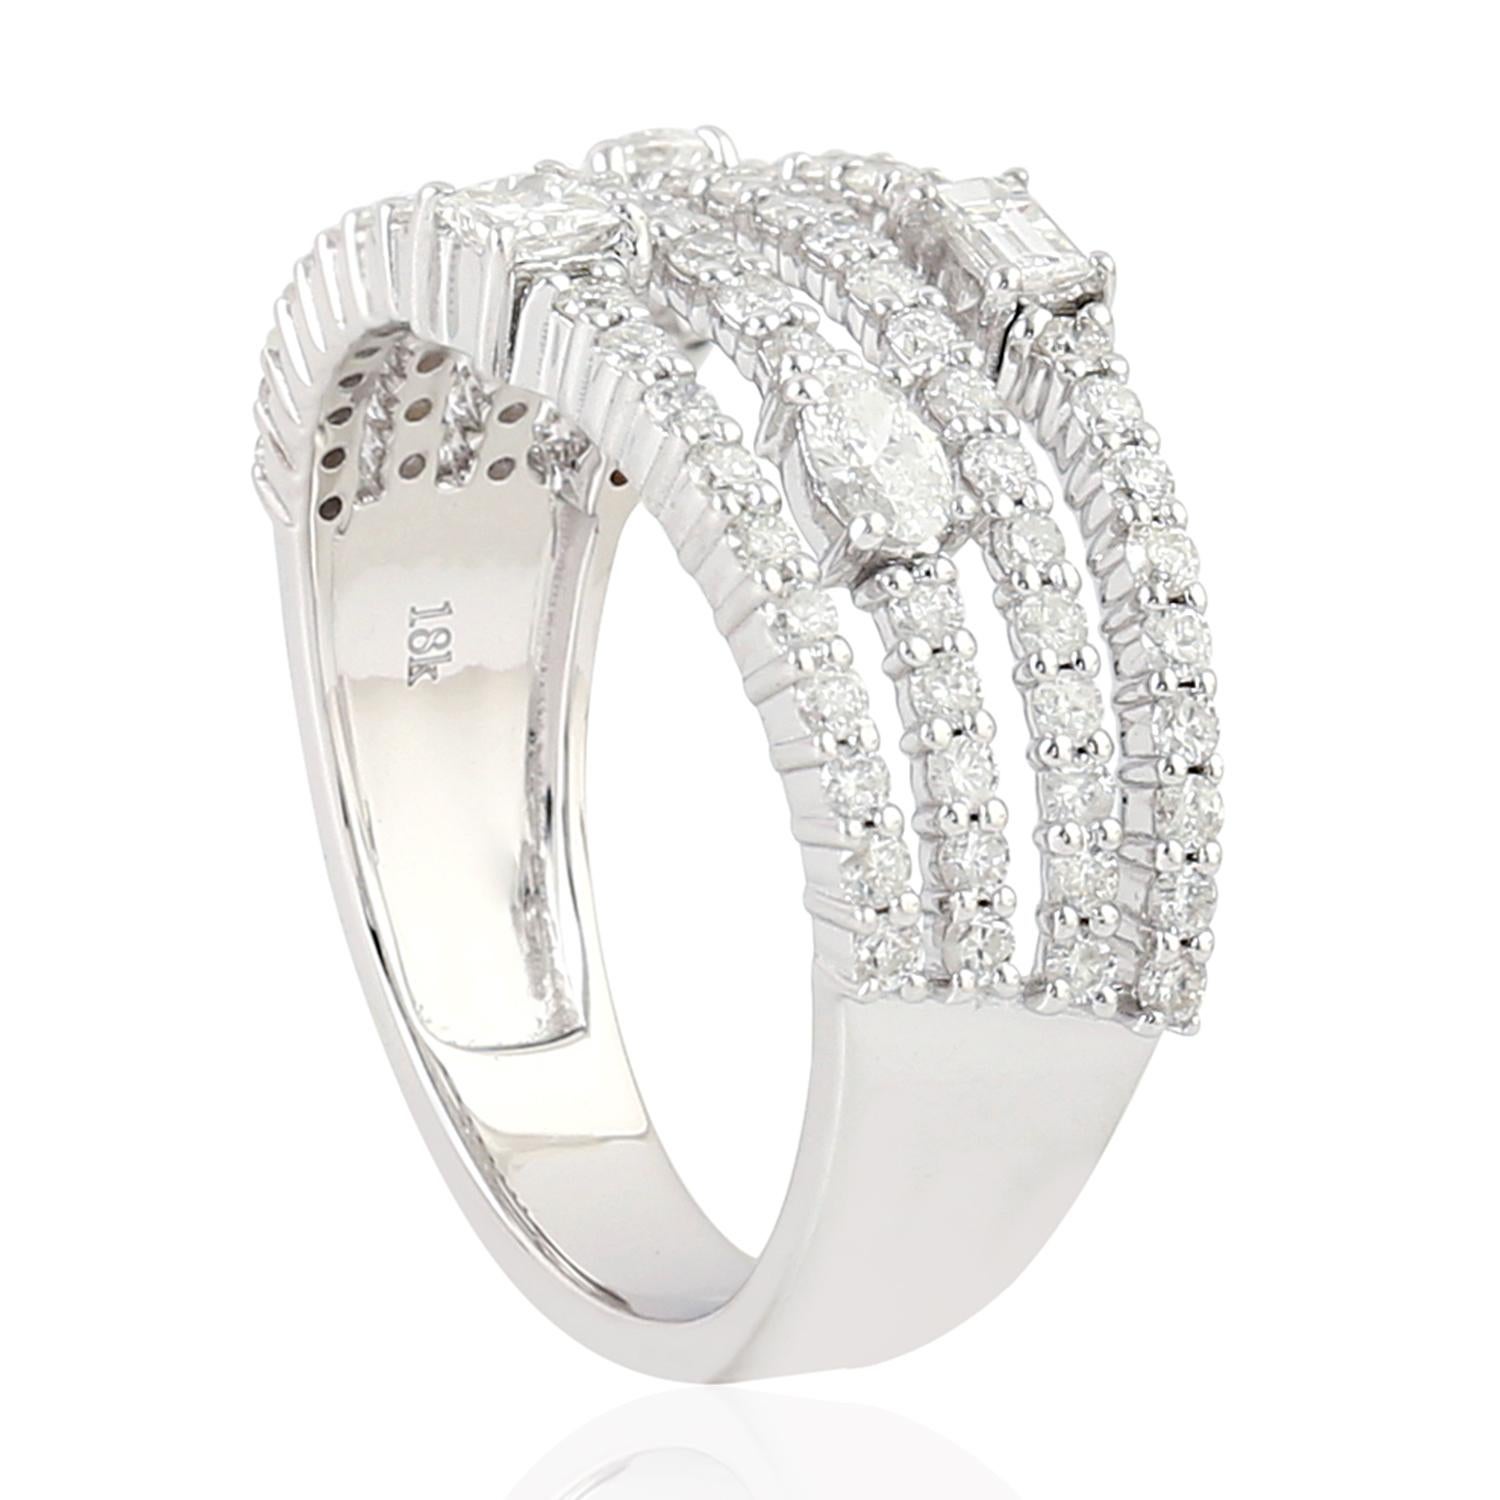 Fancy Diamond Band Ring With Pave Diamonds Made In 18k White Gold In New Condition For Sale In New York, NY